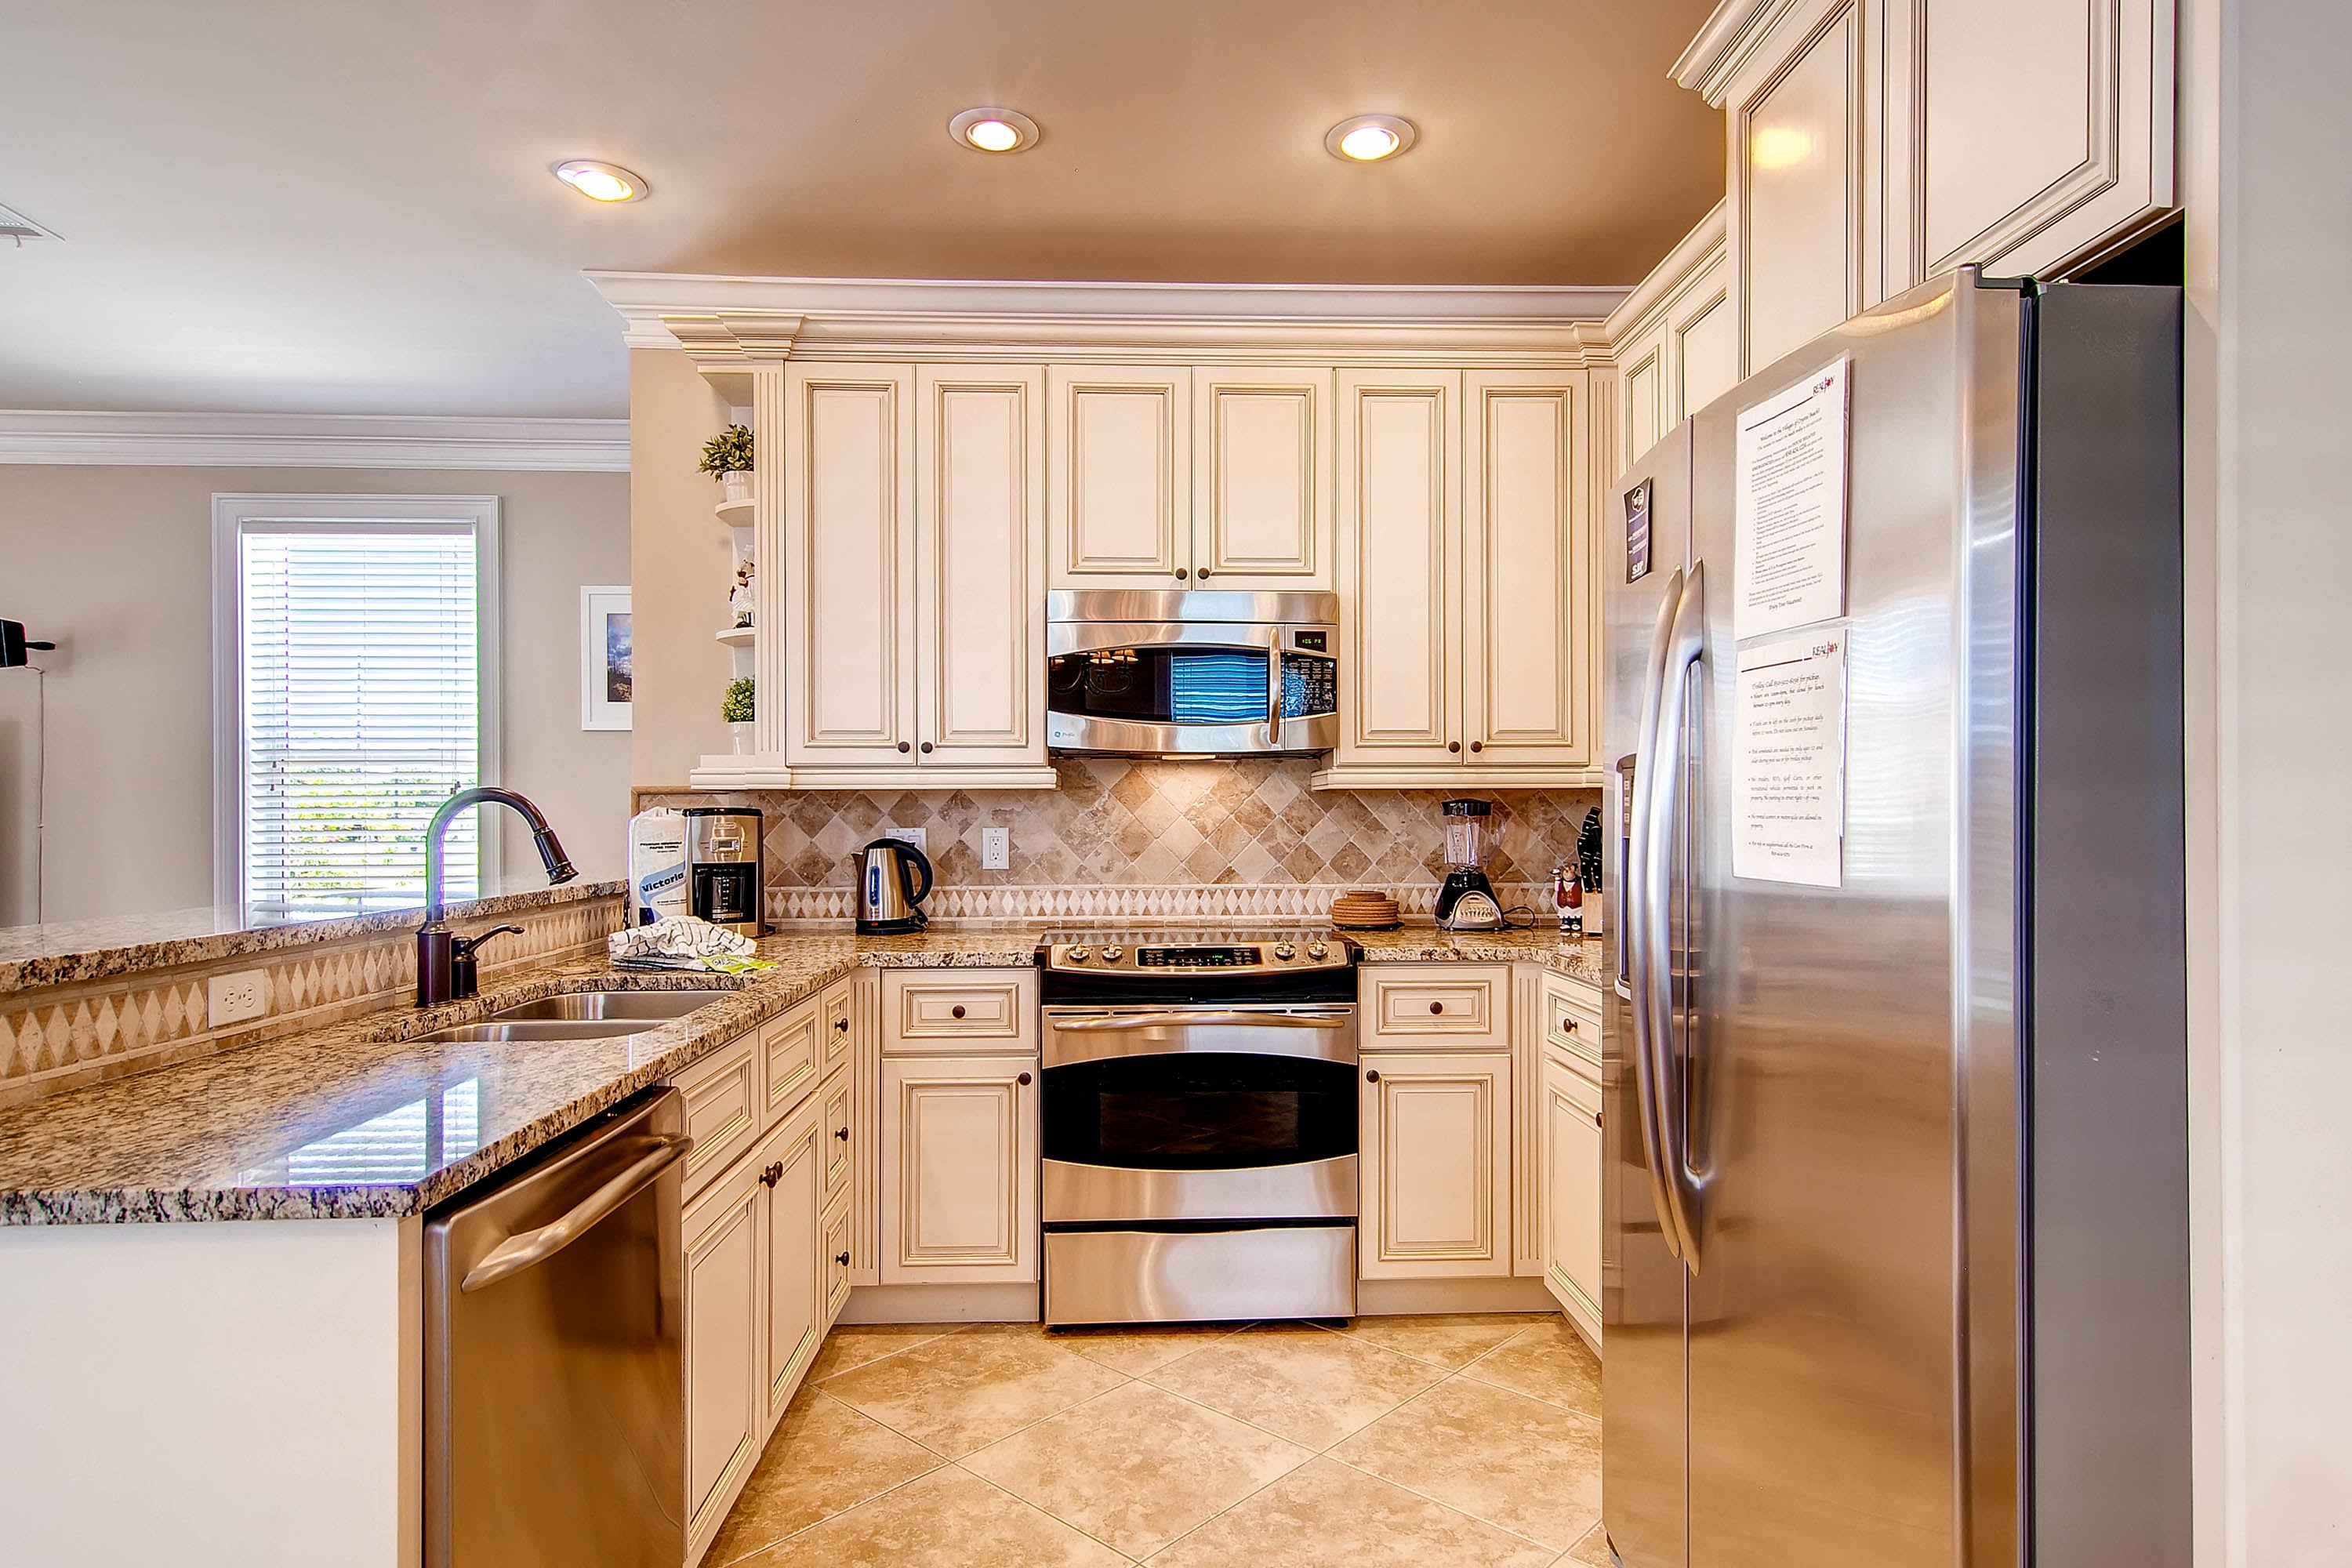 Gourmet Kitchen - Granite and Stainless Steel